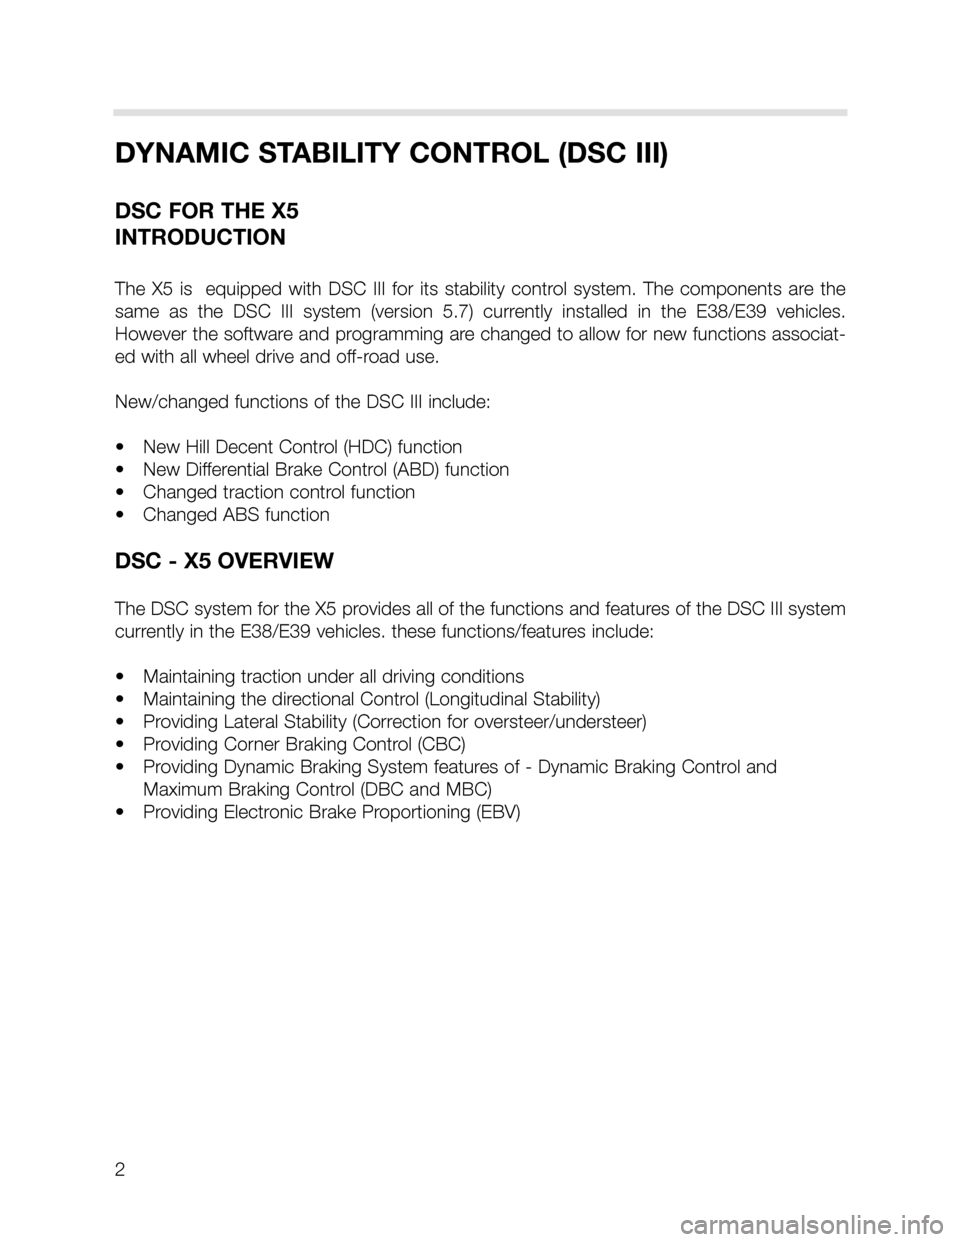 BMW X5 1999 E53 DSC System Workshop Manual 2
DYNAMIC STABILITY CONTROL (DSC III)
DSC FOR THE X5
INTRODUCTION
The  X5  is    equipped  with  DSC  III  for  its  stability  control  system.  The  components  are  the
same  as  the  DSC  III  sys